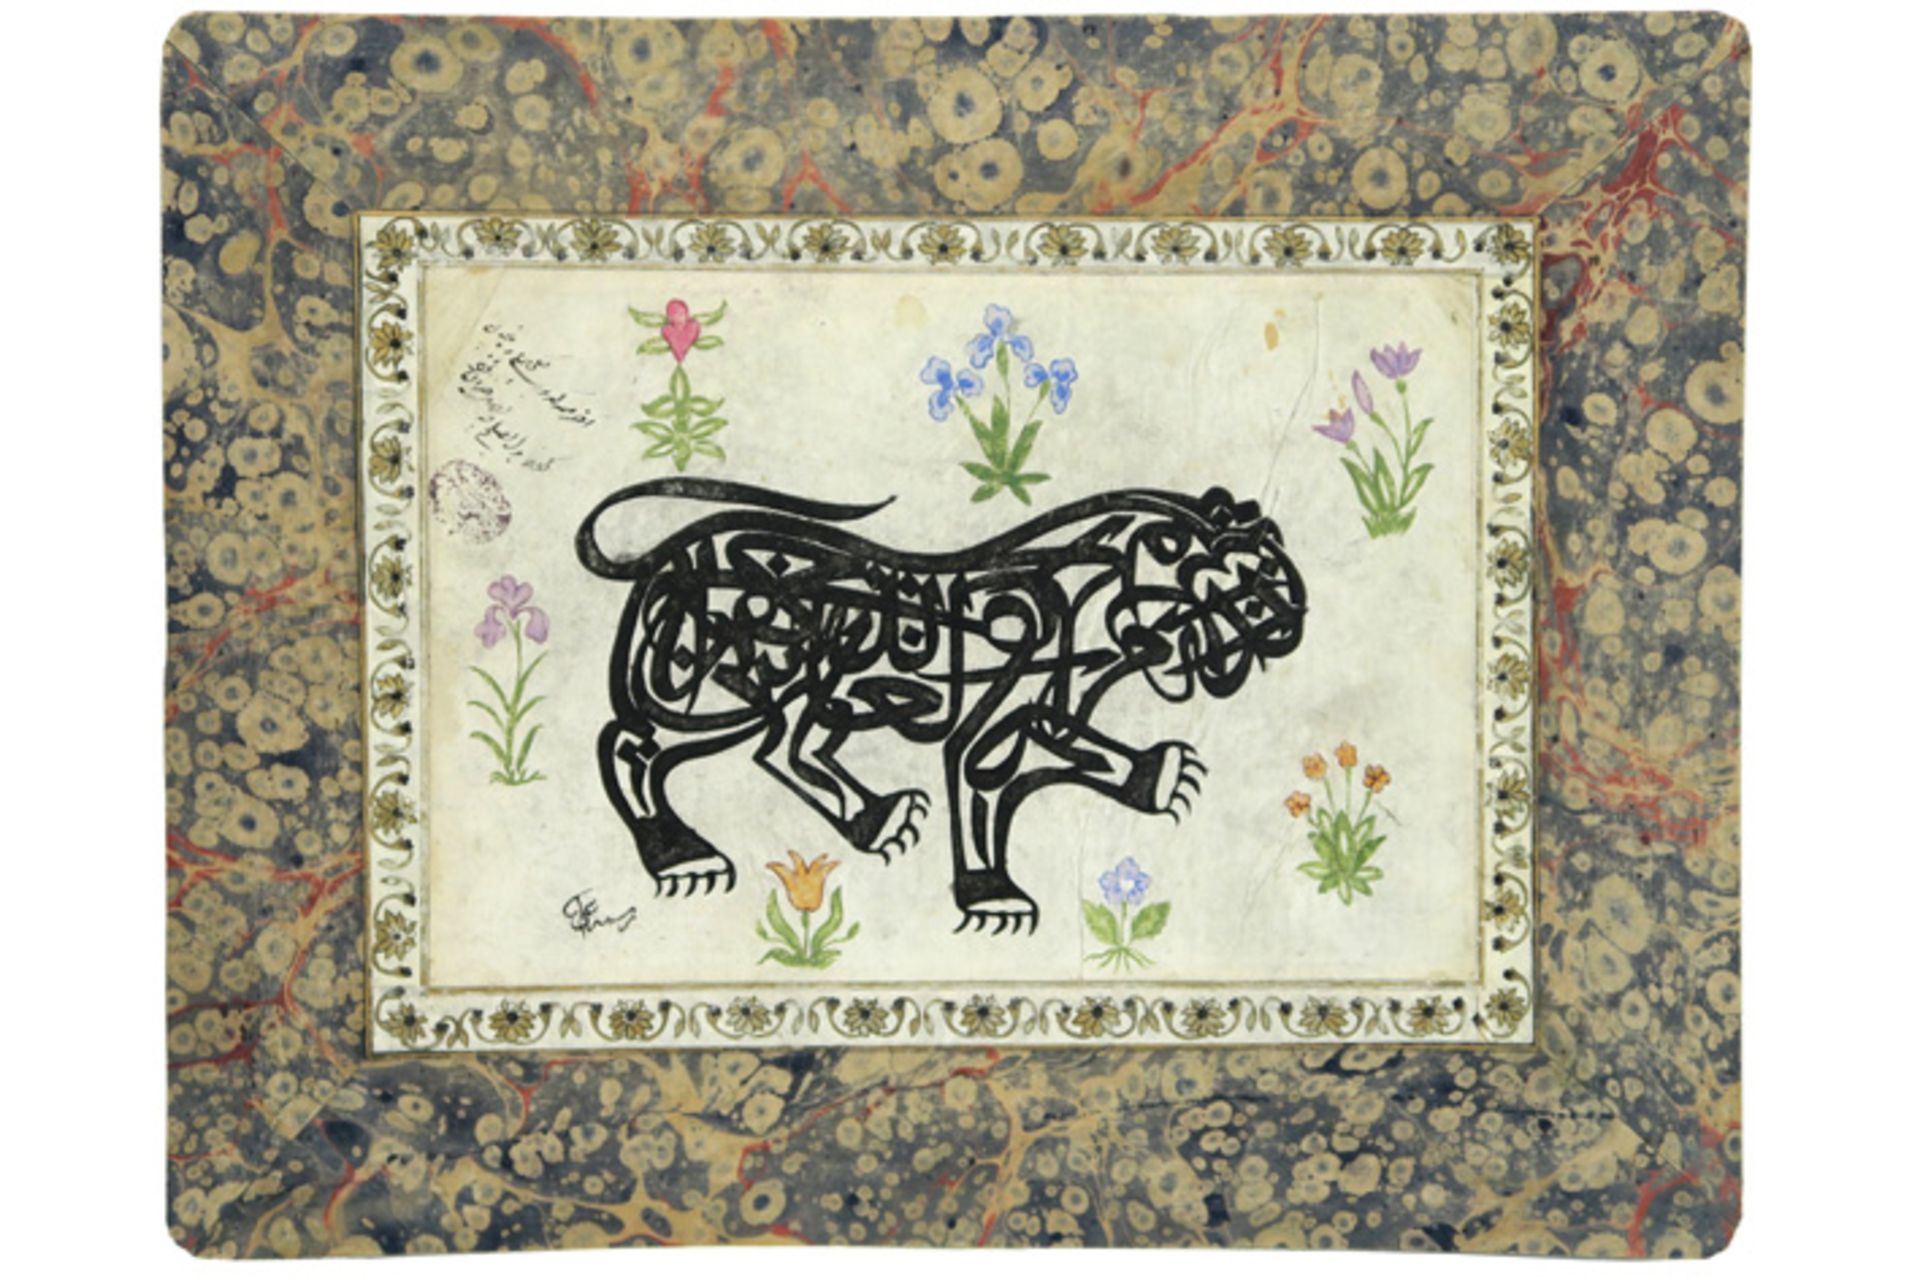 19th Cent. Ottoman calligraphy in the form of a lion, containing a text "Ali bin Abi Talib, the lion